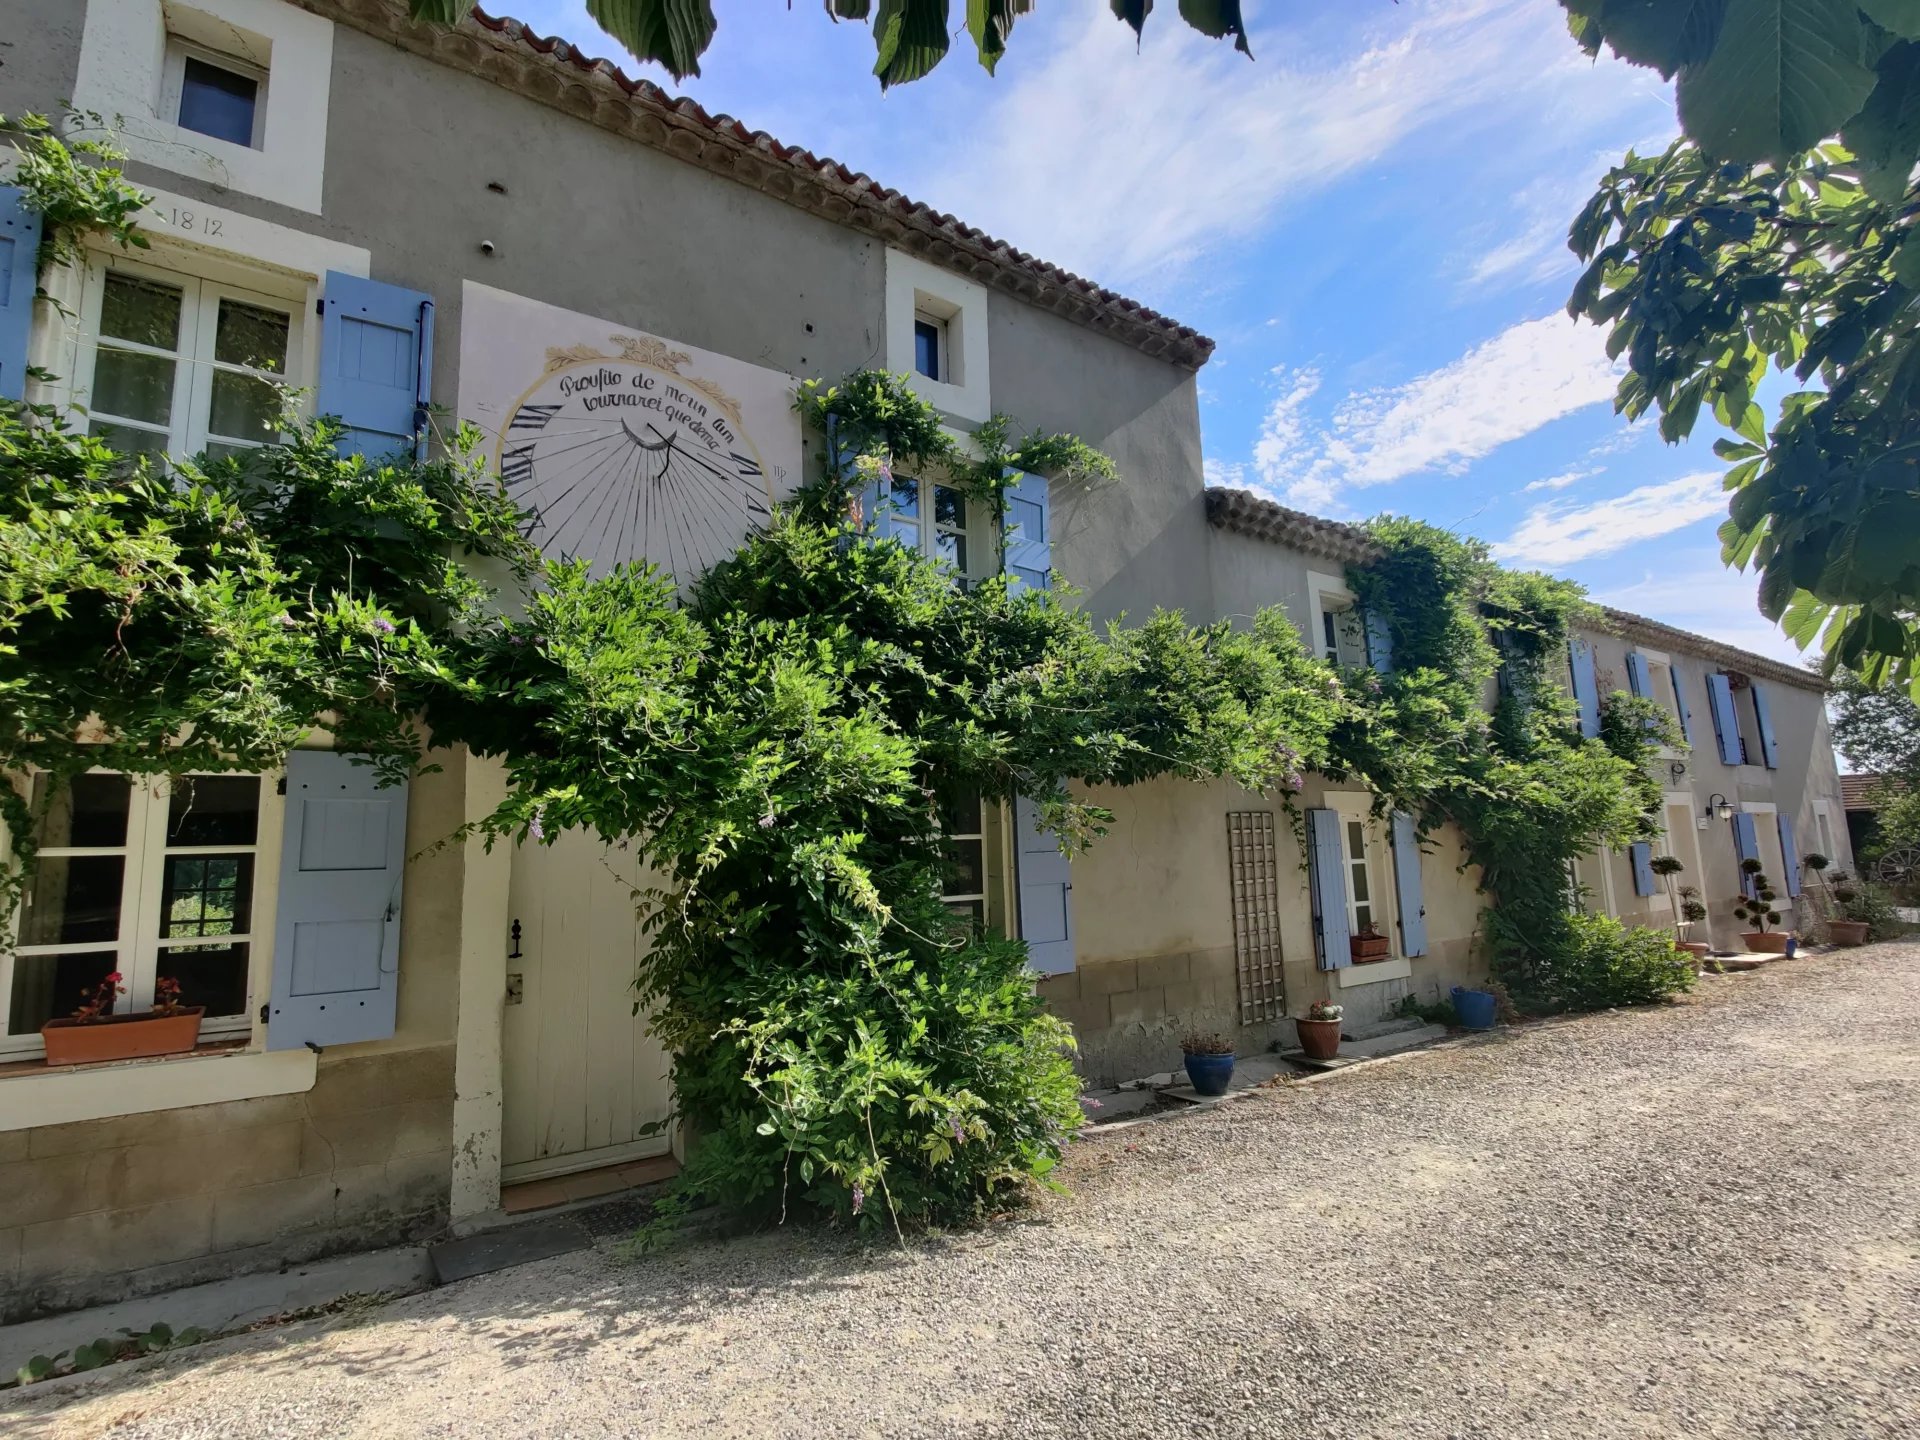 Fantastic renovated historic property with independent units, land and pool near Canal-du-Midi